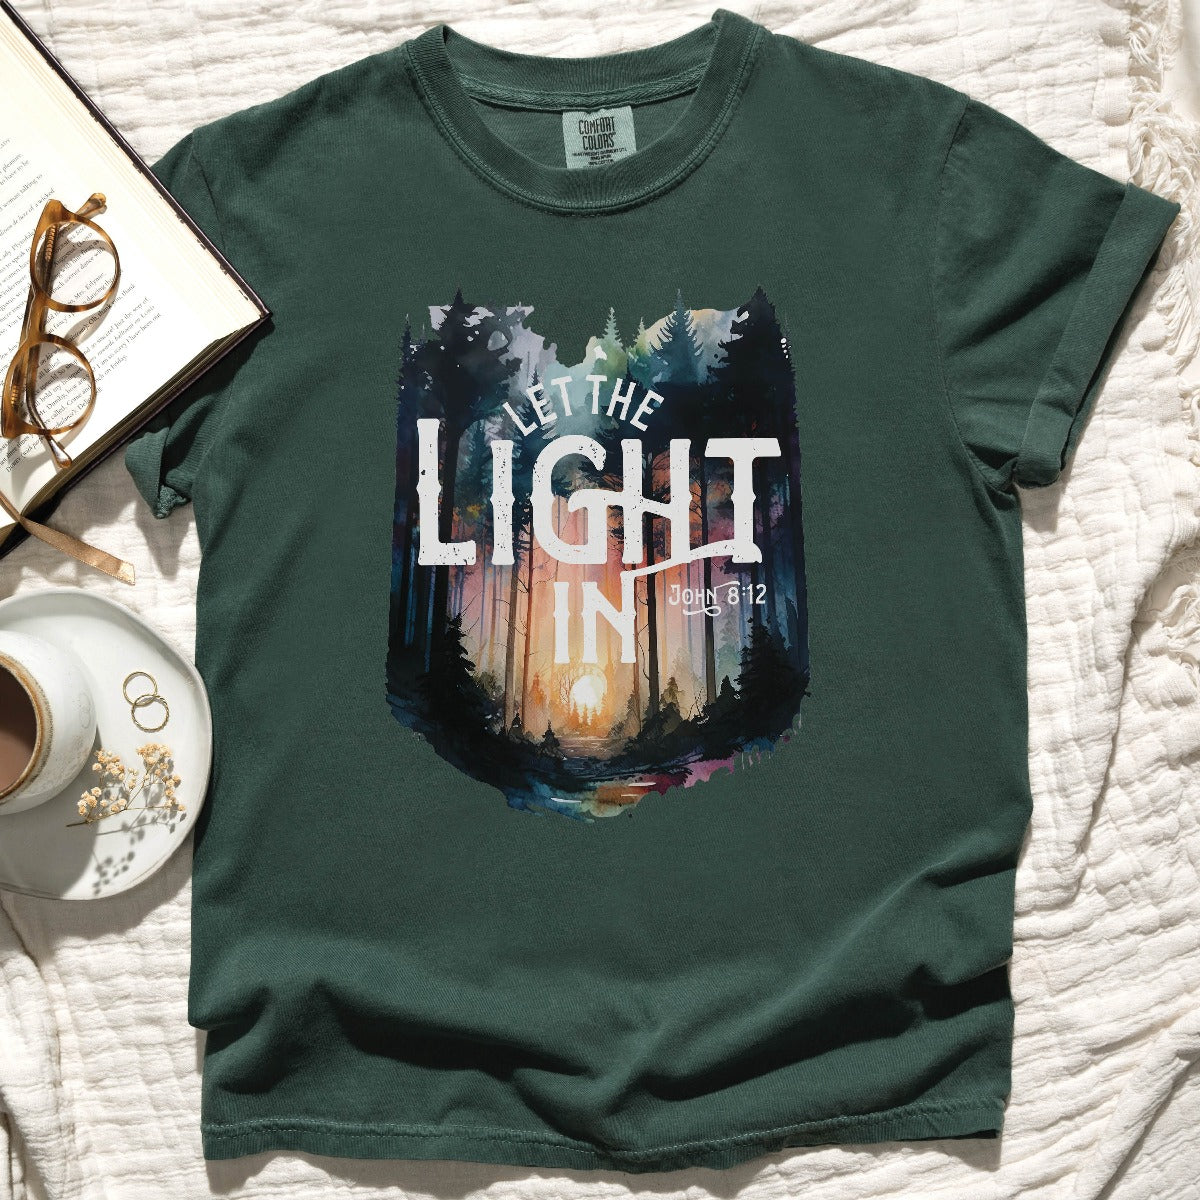 Blue Spruce dark green color garment dyed Comfort Colors C1717 unisex faith-based Christian t-shirt with "Let the Light In" John 8:12 bible verse and watercolor moody forest trees scene, designed for men and women